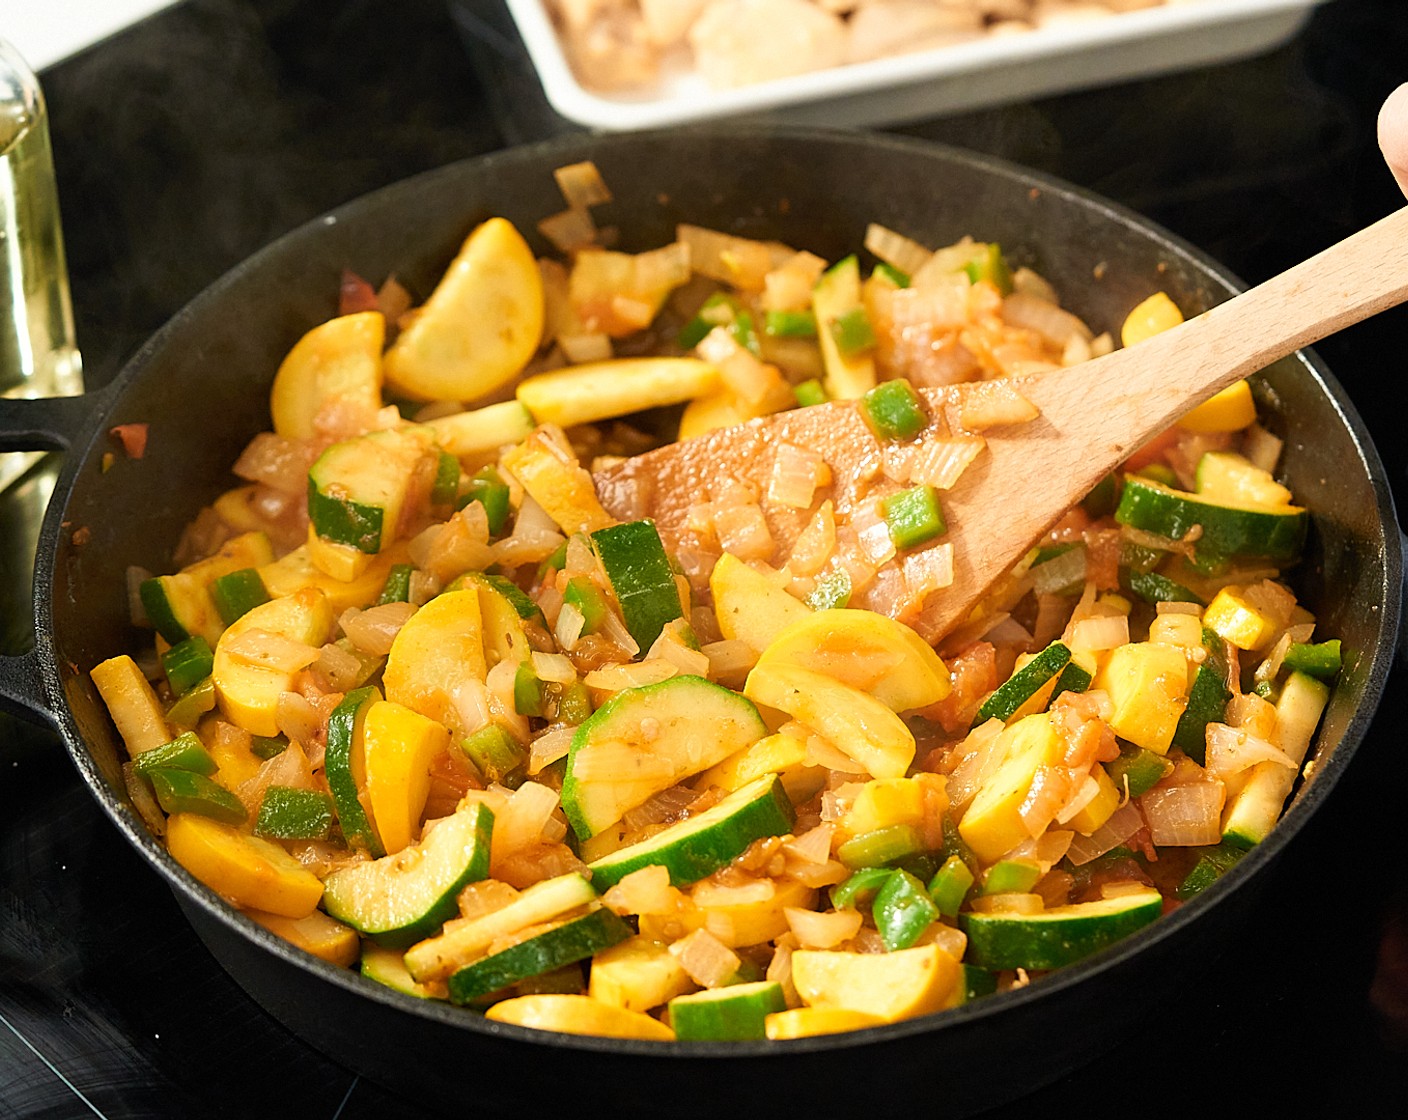 step 4 Remove the chicken. To the same pan, add remaining Ground Cumin (1/2 tsp), Tomato (1), Yellow Squash (1), Vegetable Oil (1 Tbsp), Zucchini (1), Green Bell Pepper (1), White Onion (1), Mexican Oregano (1/2 tsp), and Ancho Chili Powder (1/2 tsp). Cook for 5 minutes, or until the vegetables begin to soften.